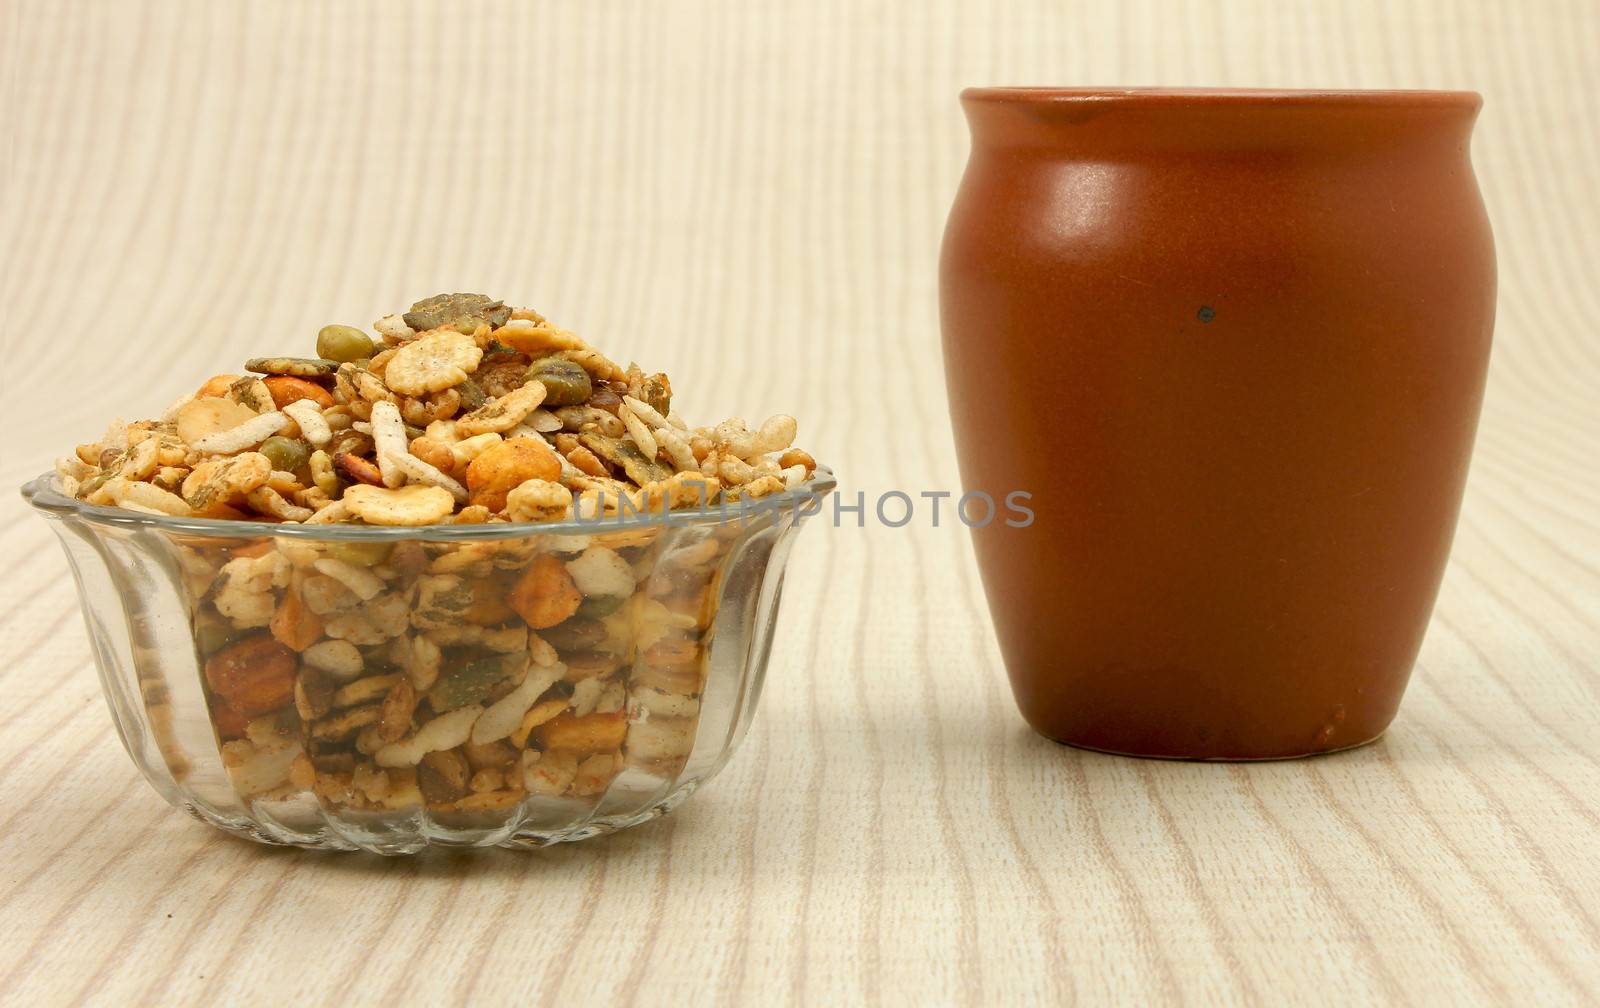 namkeen in glass bowl with ceramic cup